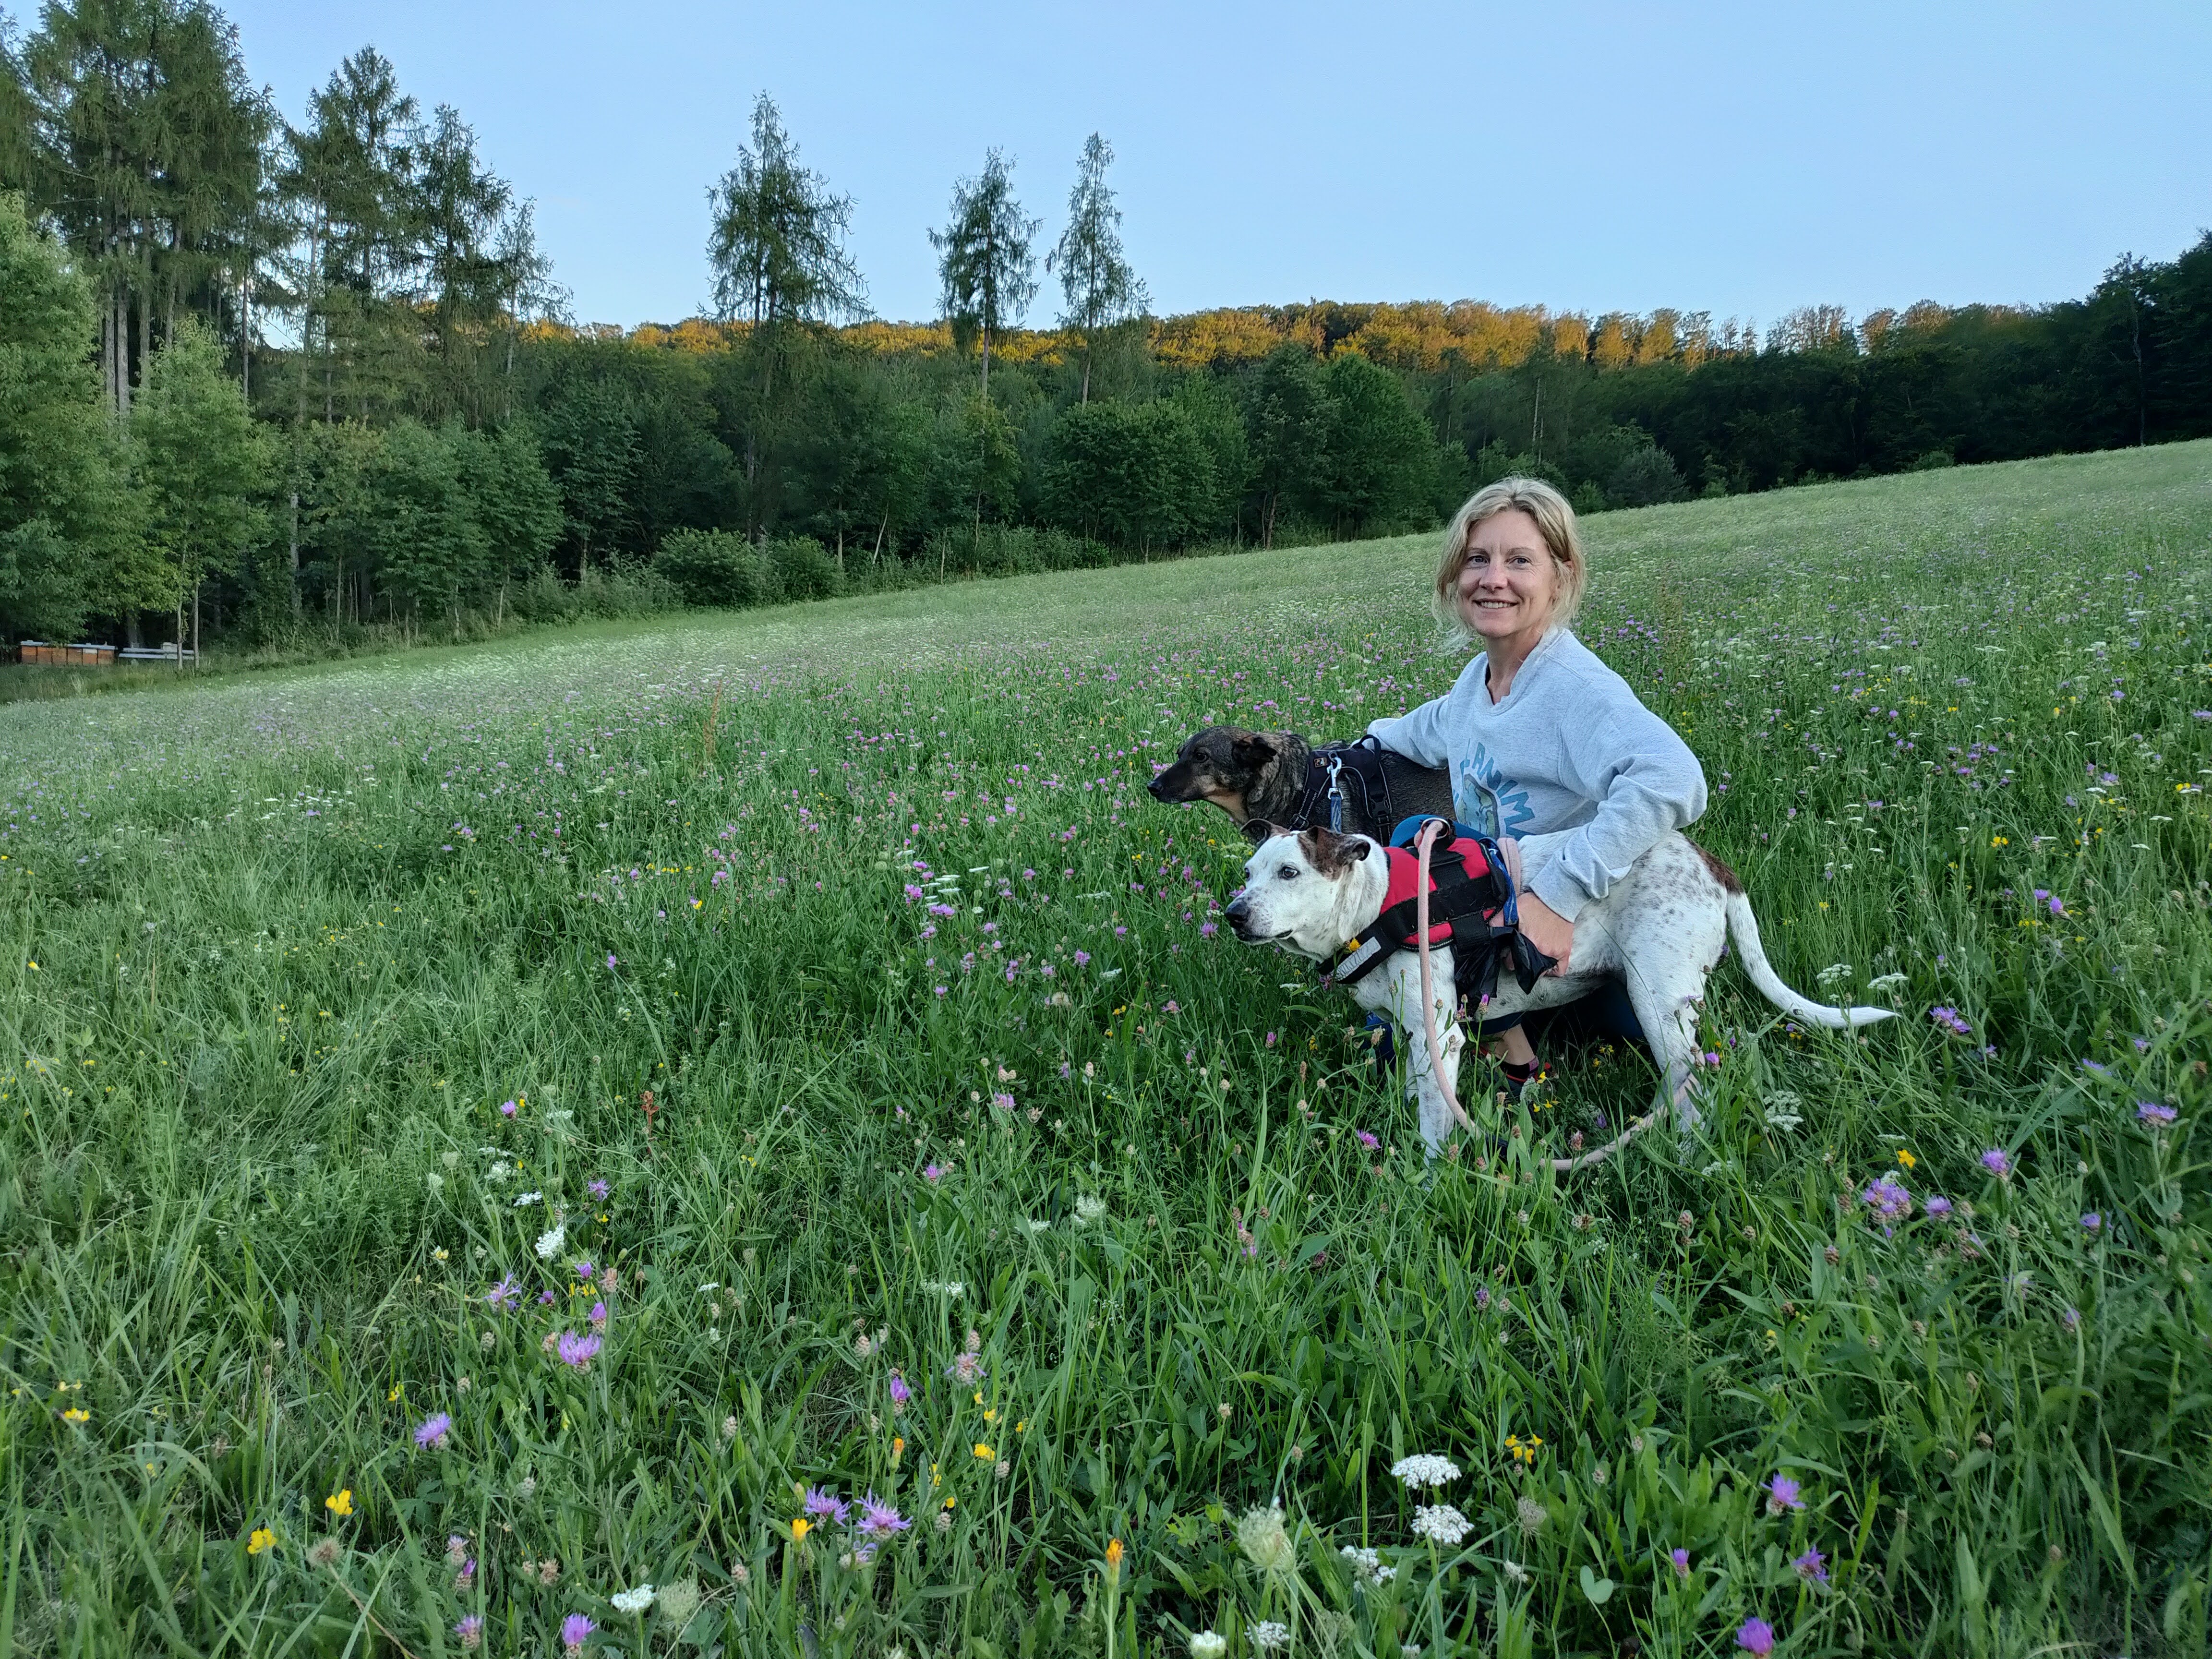 Shannon Falconer, Ph.D., chief executive officer and co-founder of Because, Animals, with her dogs Gaia (front) and Nori (back).